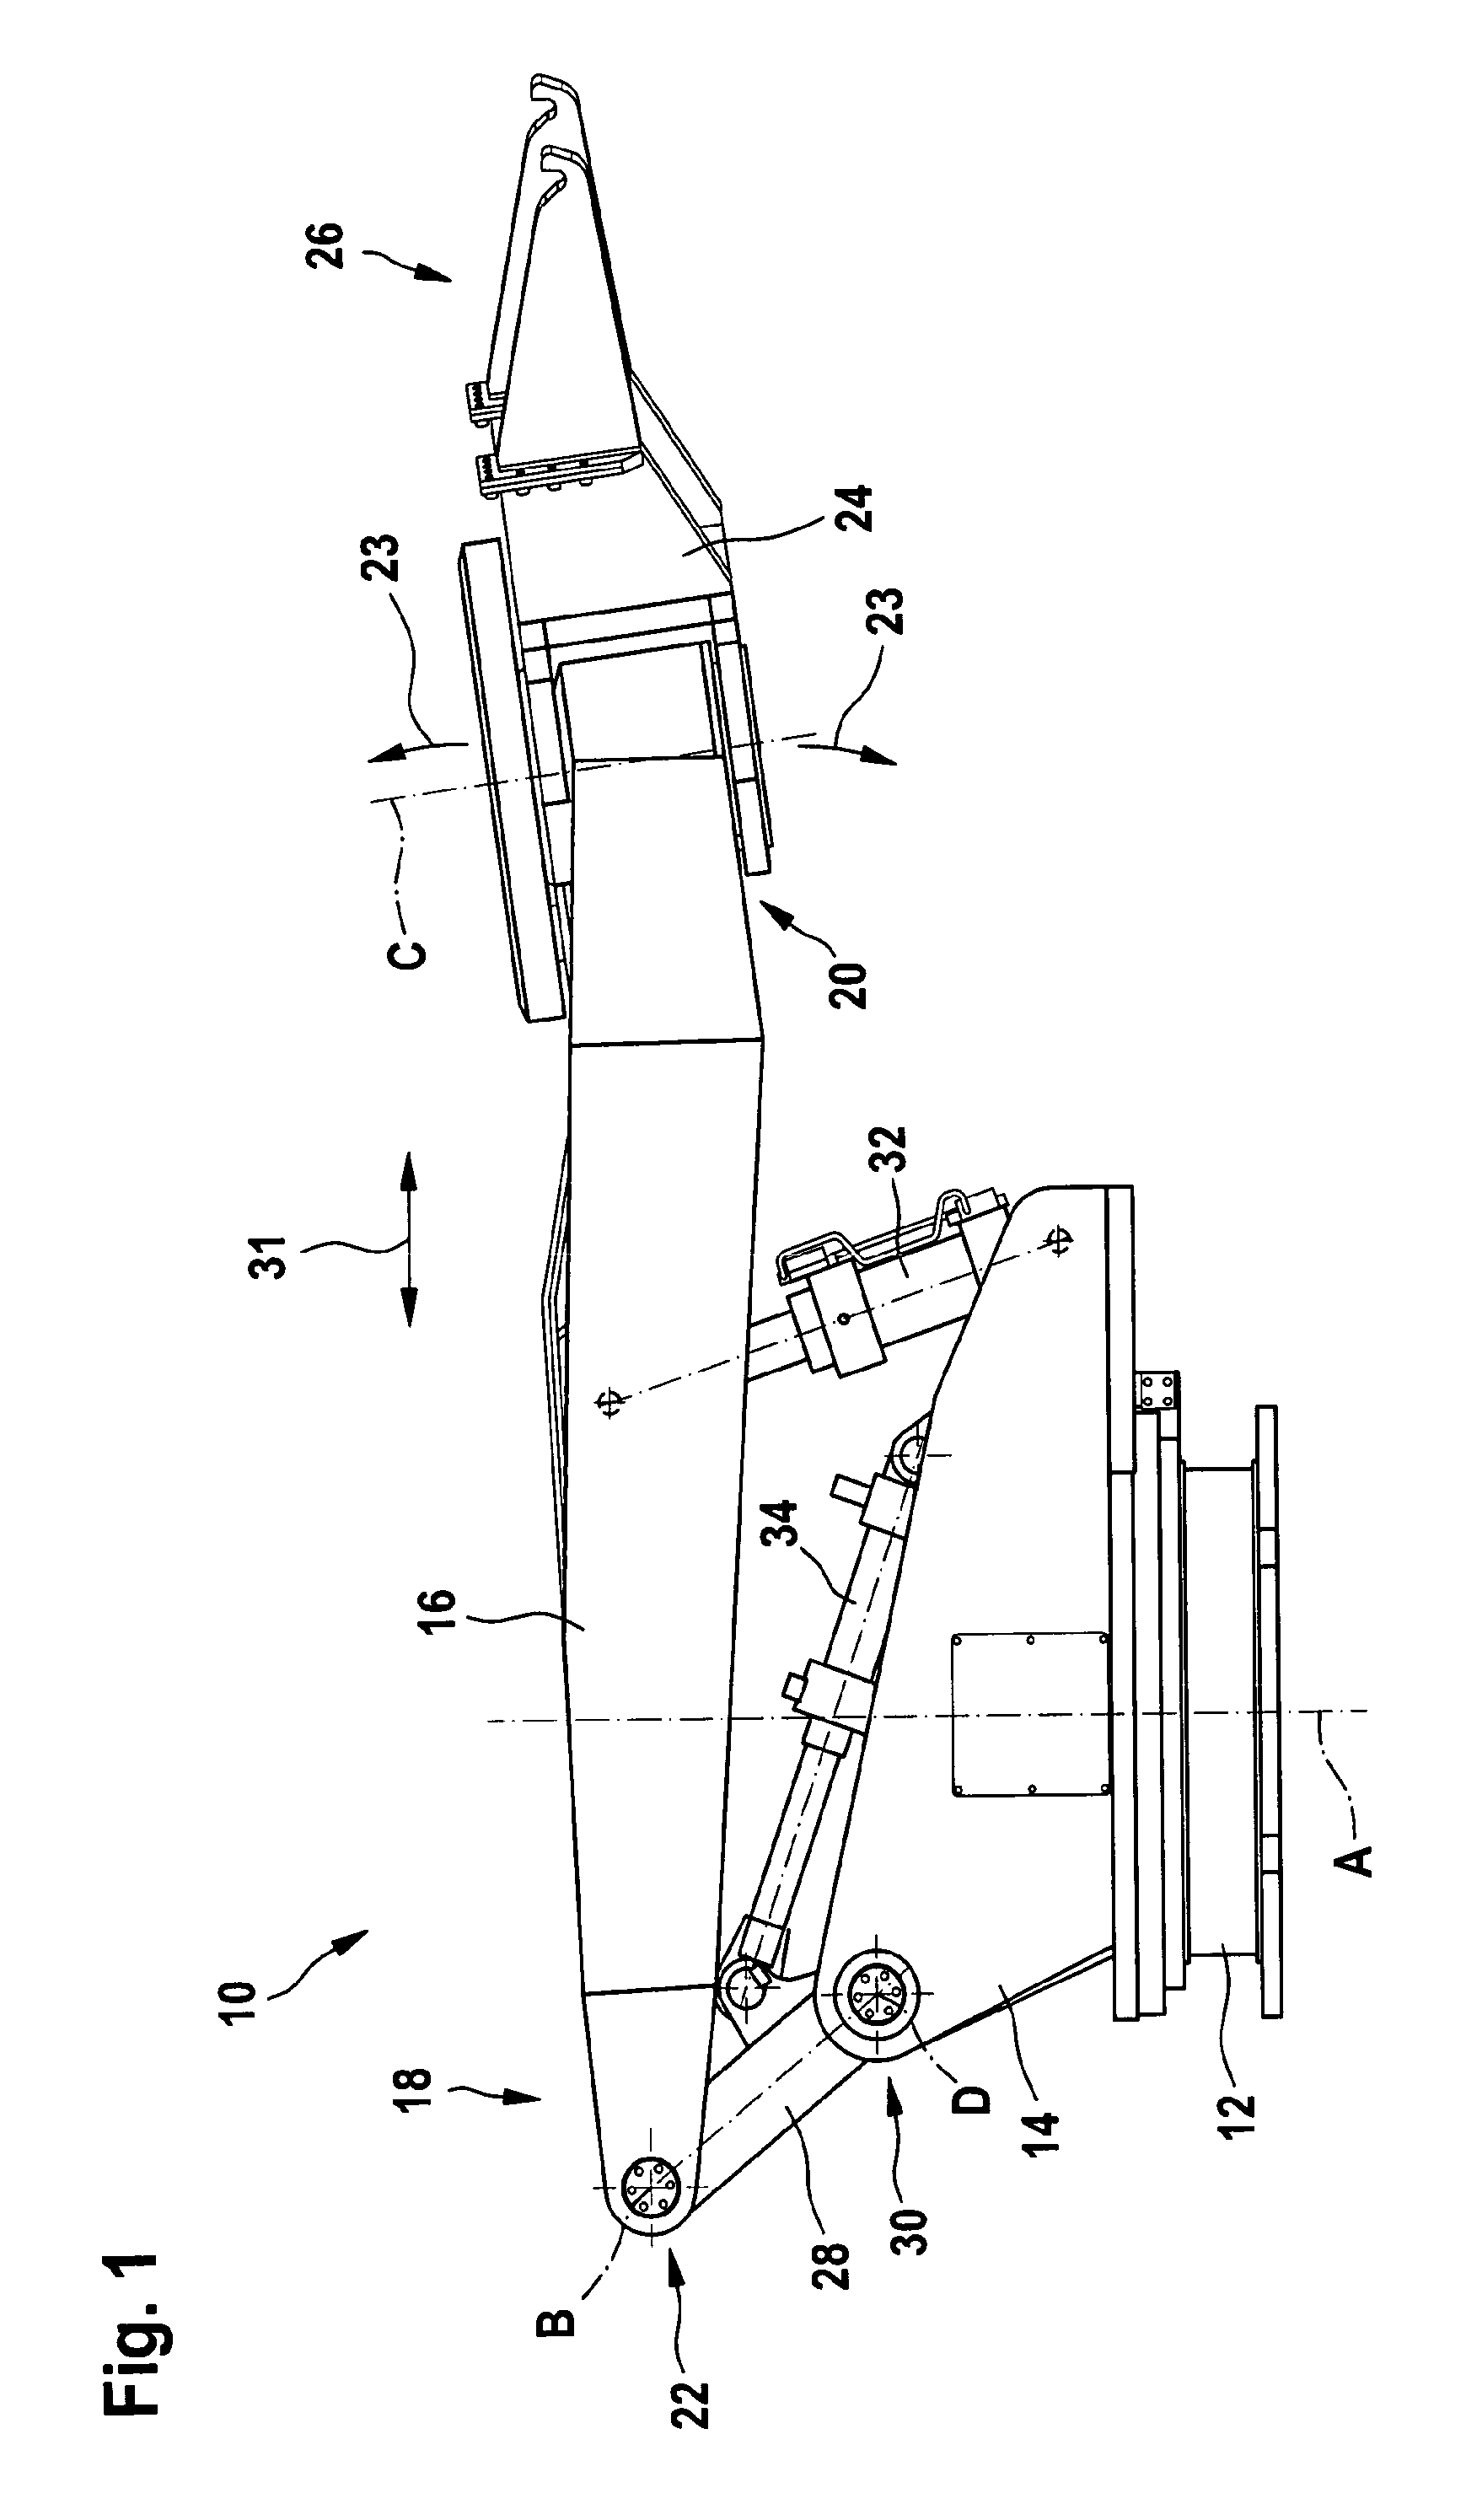 Handling Device For Elements of Tapping Runners